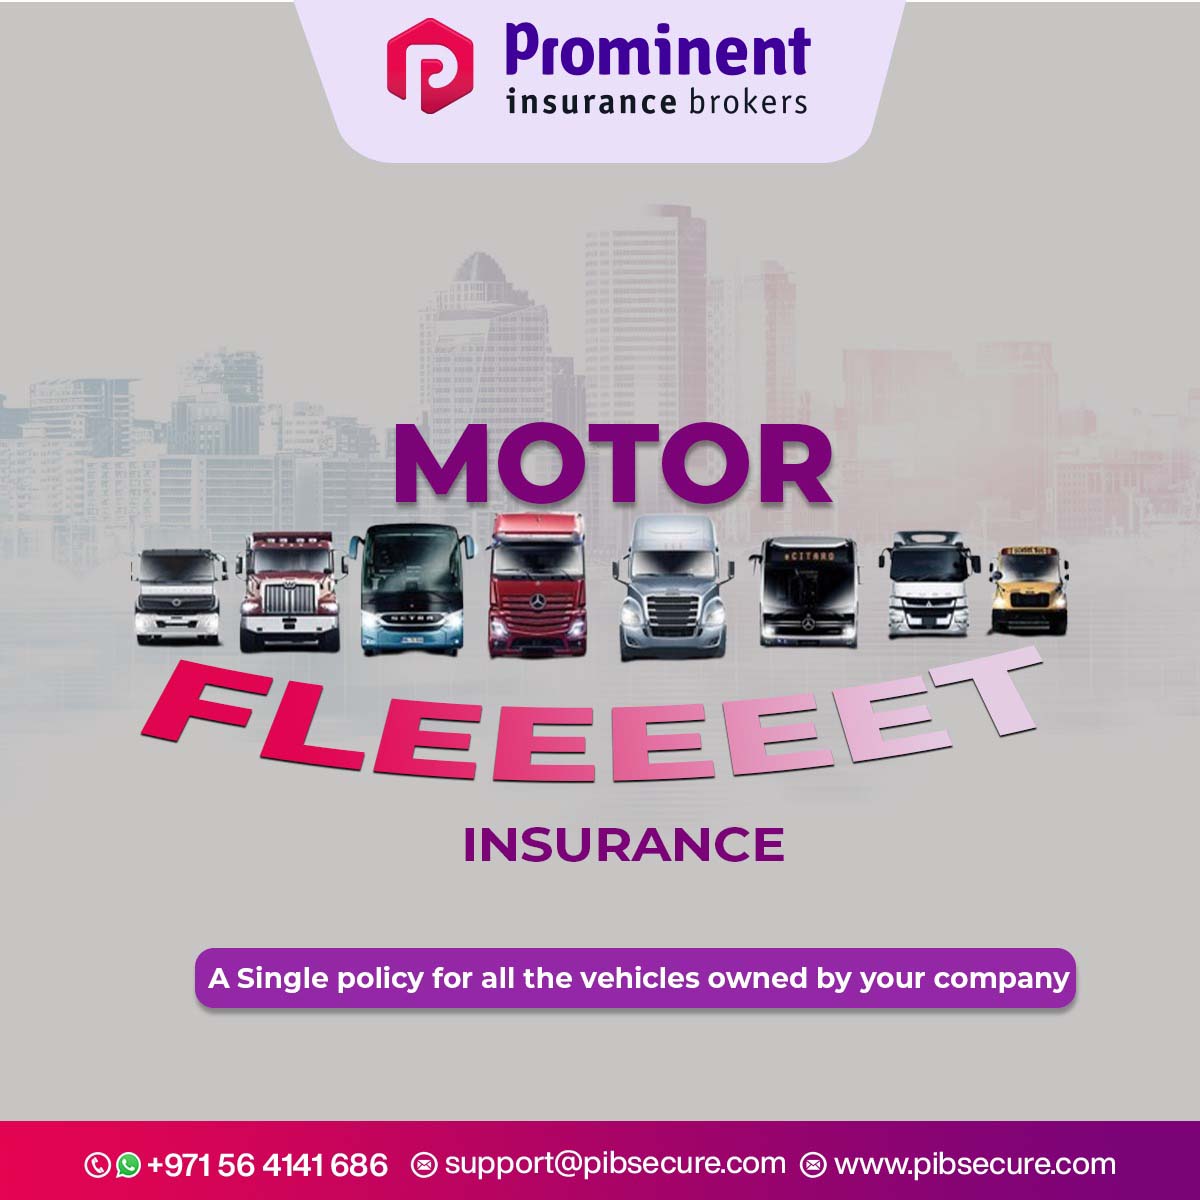 Next-Gen Motor Insurance Puts Drivers in the Fast Lane to Protection and Peace of Mind
#InsuranceInnovation
#SafetyFirst
#MotorInsurance
#PeaceOfMind
#RoadSafety
#ProtectYourRide
#DriveWithConfidence
#InsuranceCoverage
#VehicleProtection
#InsuranceSolutions
#DriveSafe